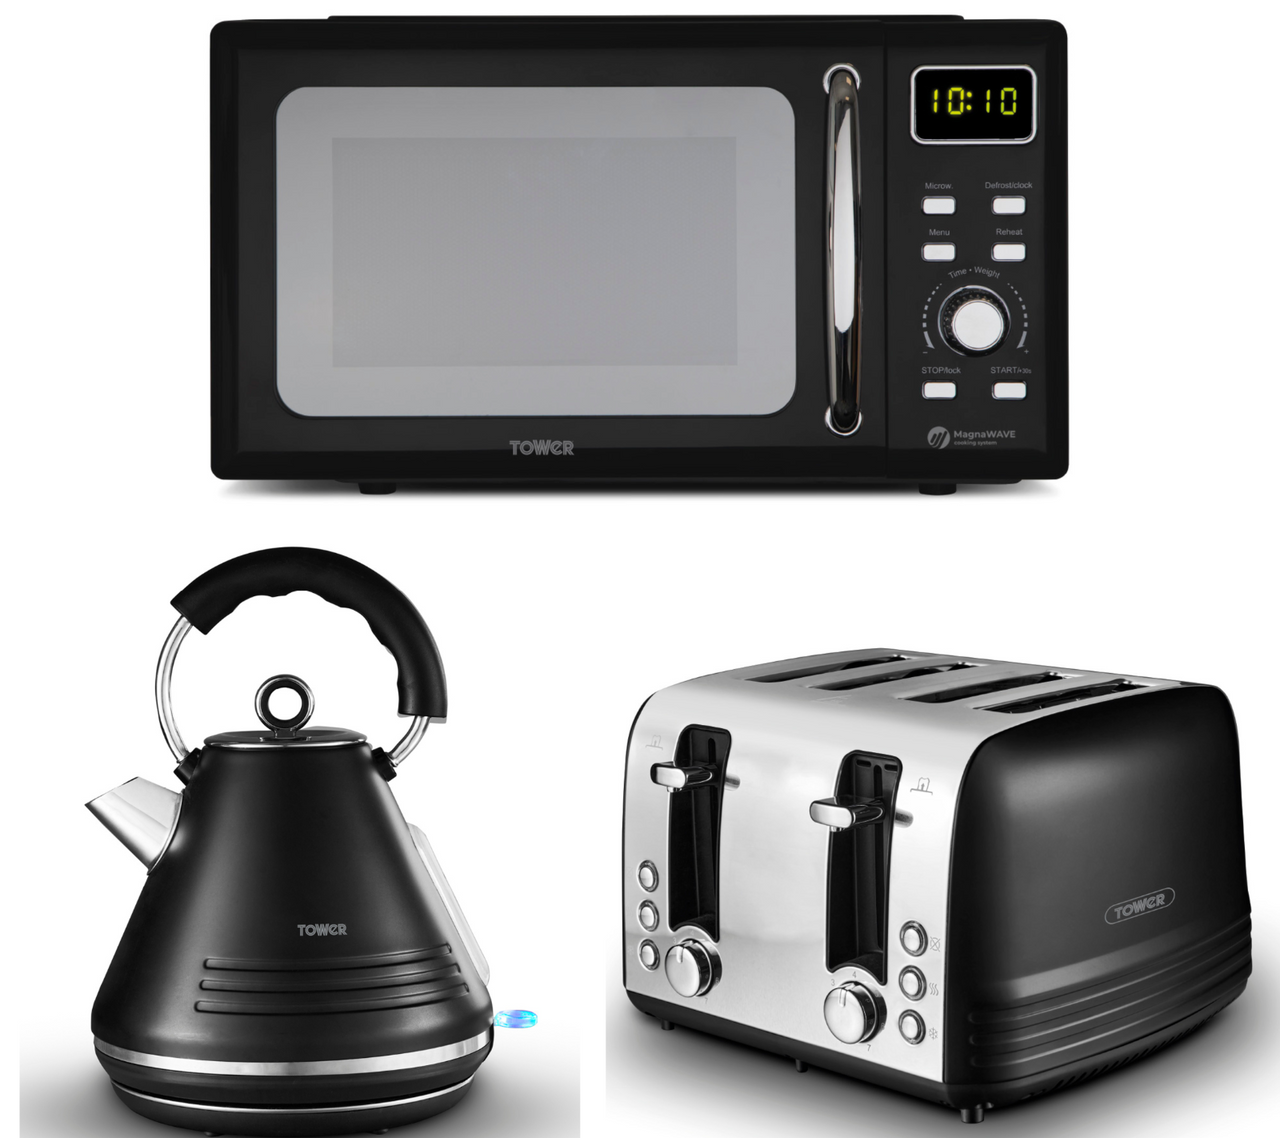 Tower Ash Black Pyramid Kettle, 4 Slice Toaster & T24041BLK 800W 20L Microwave